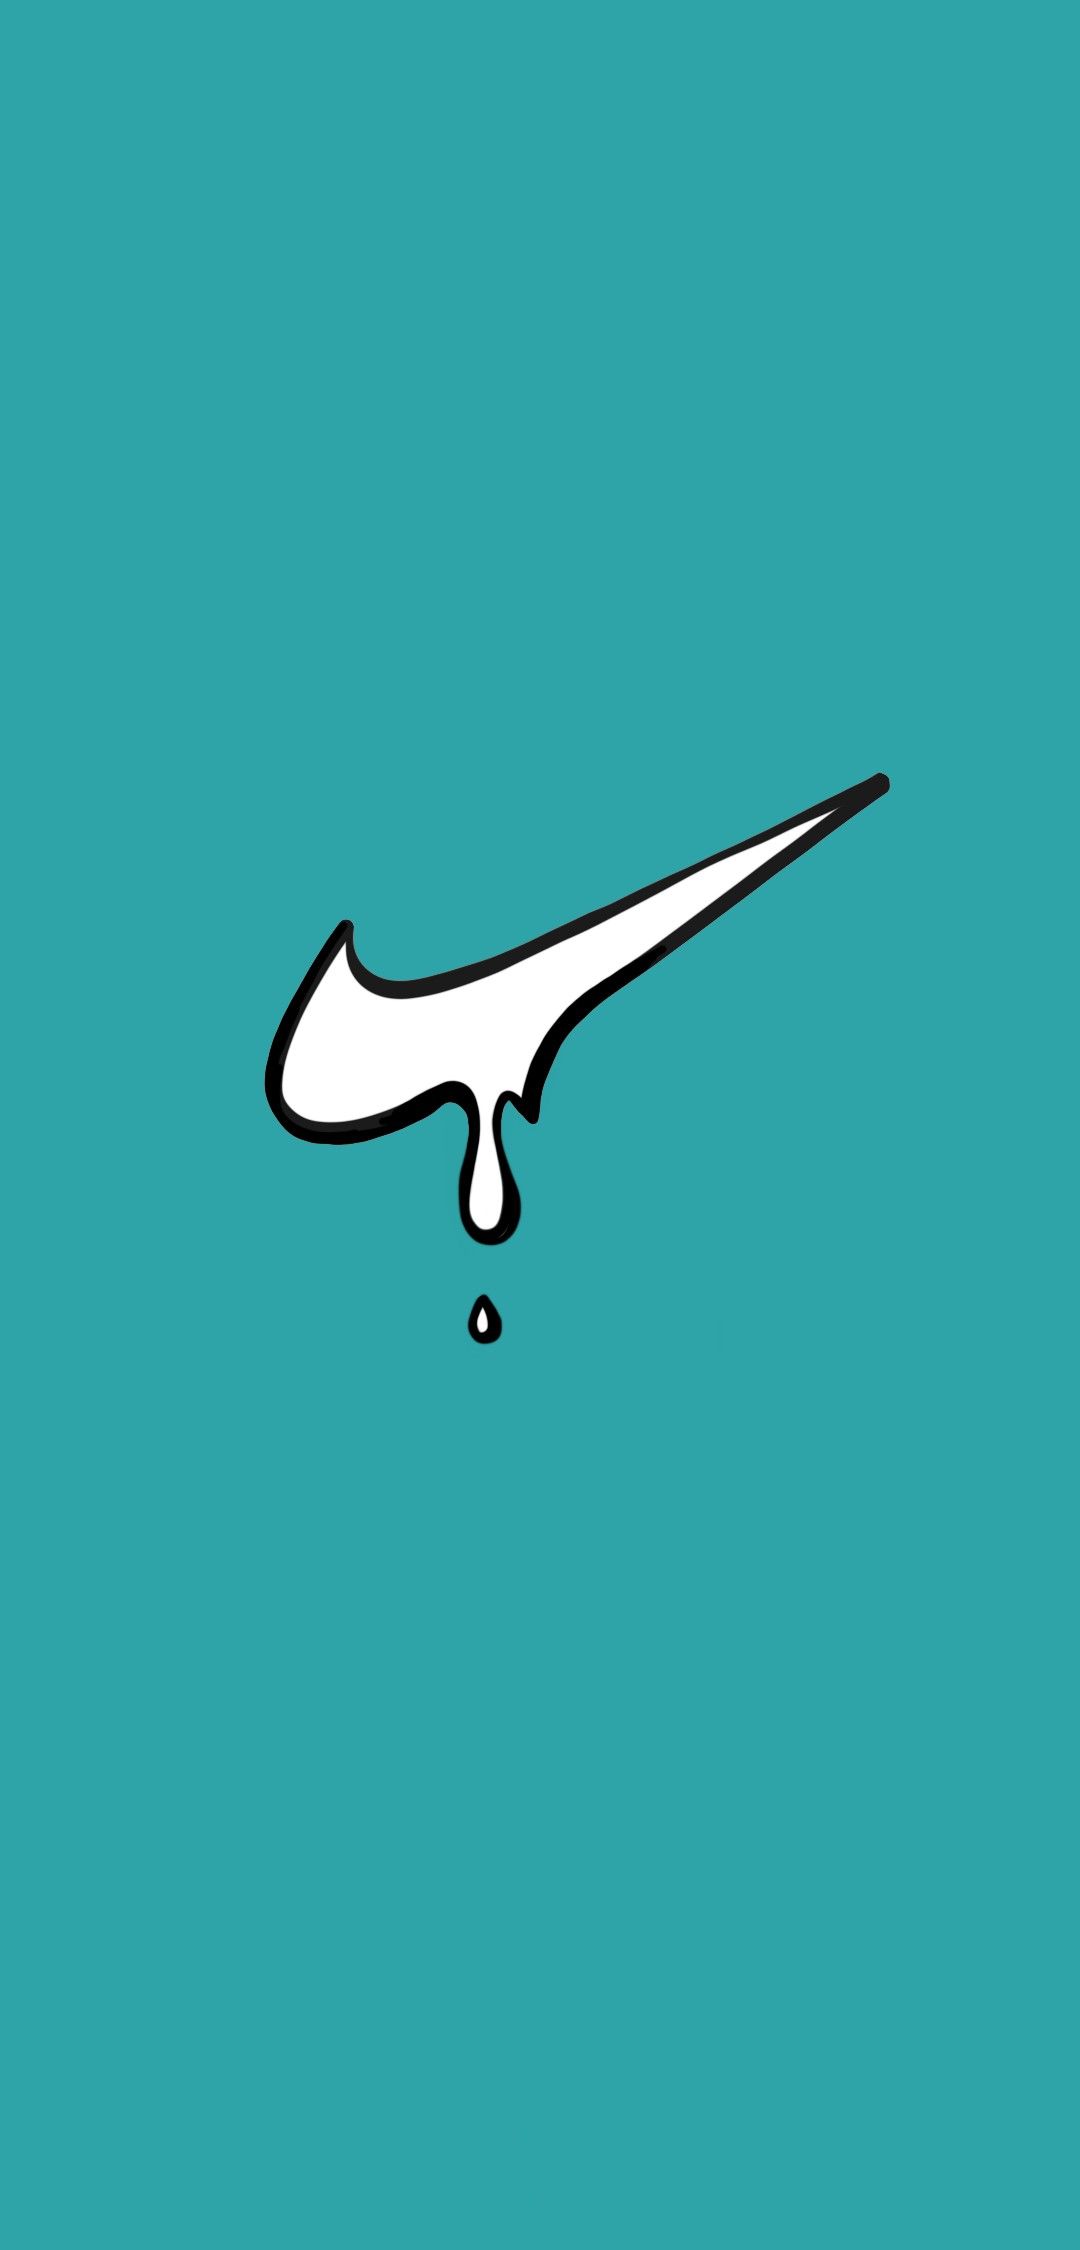 Drippy Nike Wallpapers - Wallpaper Cave